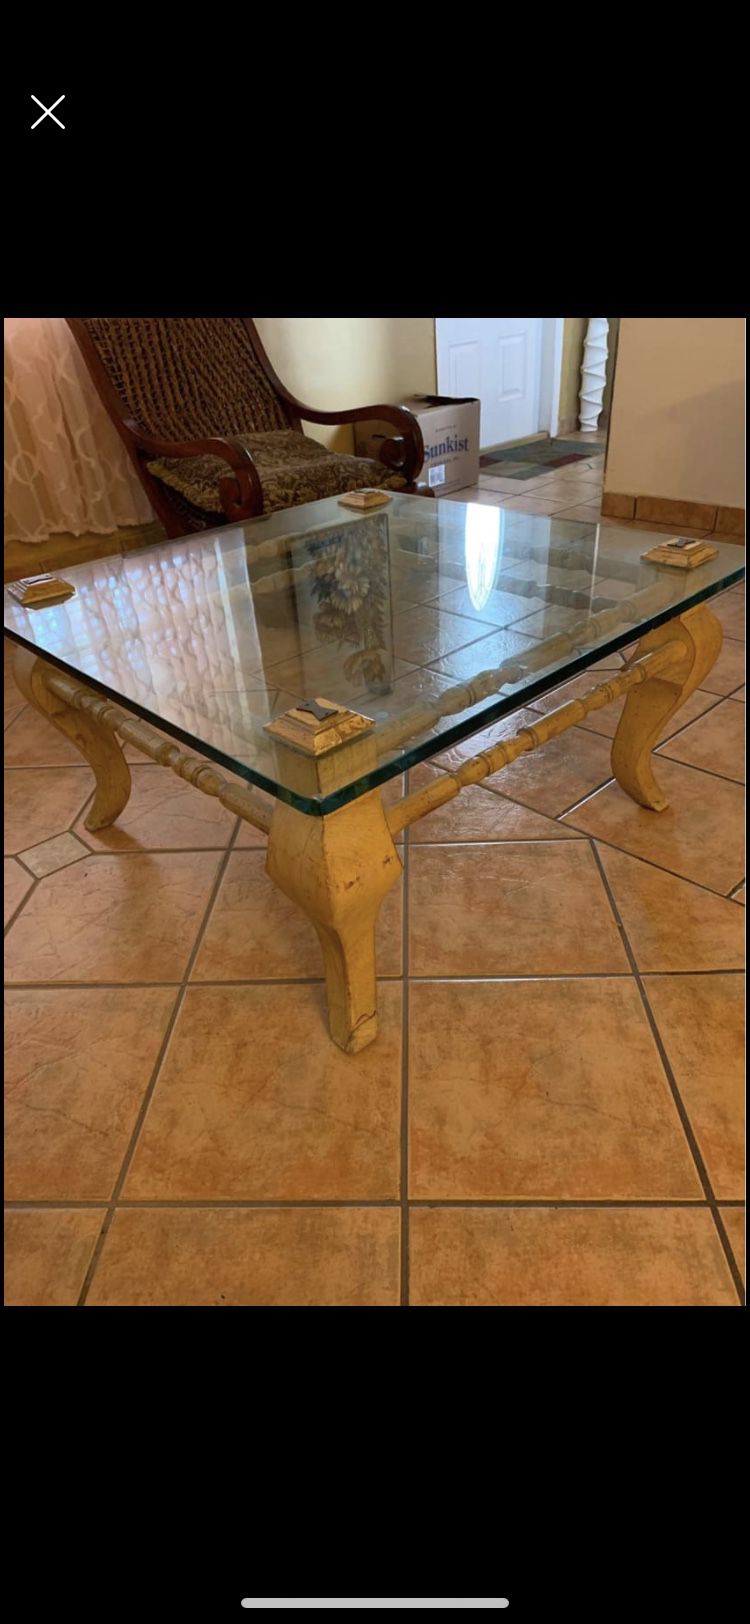 Antique Glass and wood coffee table